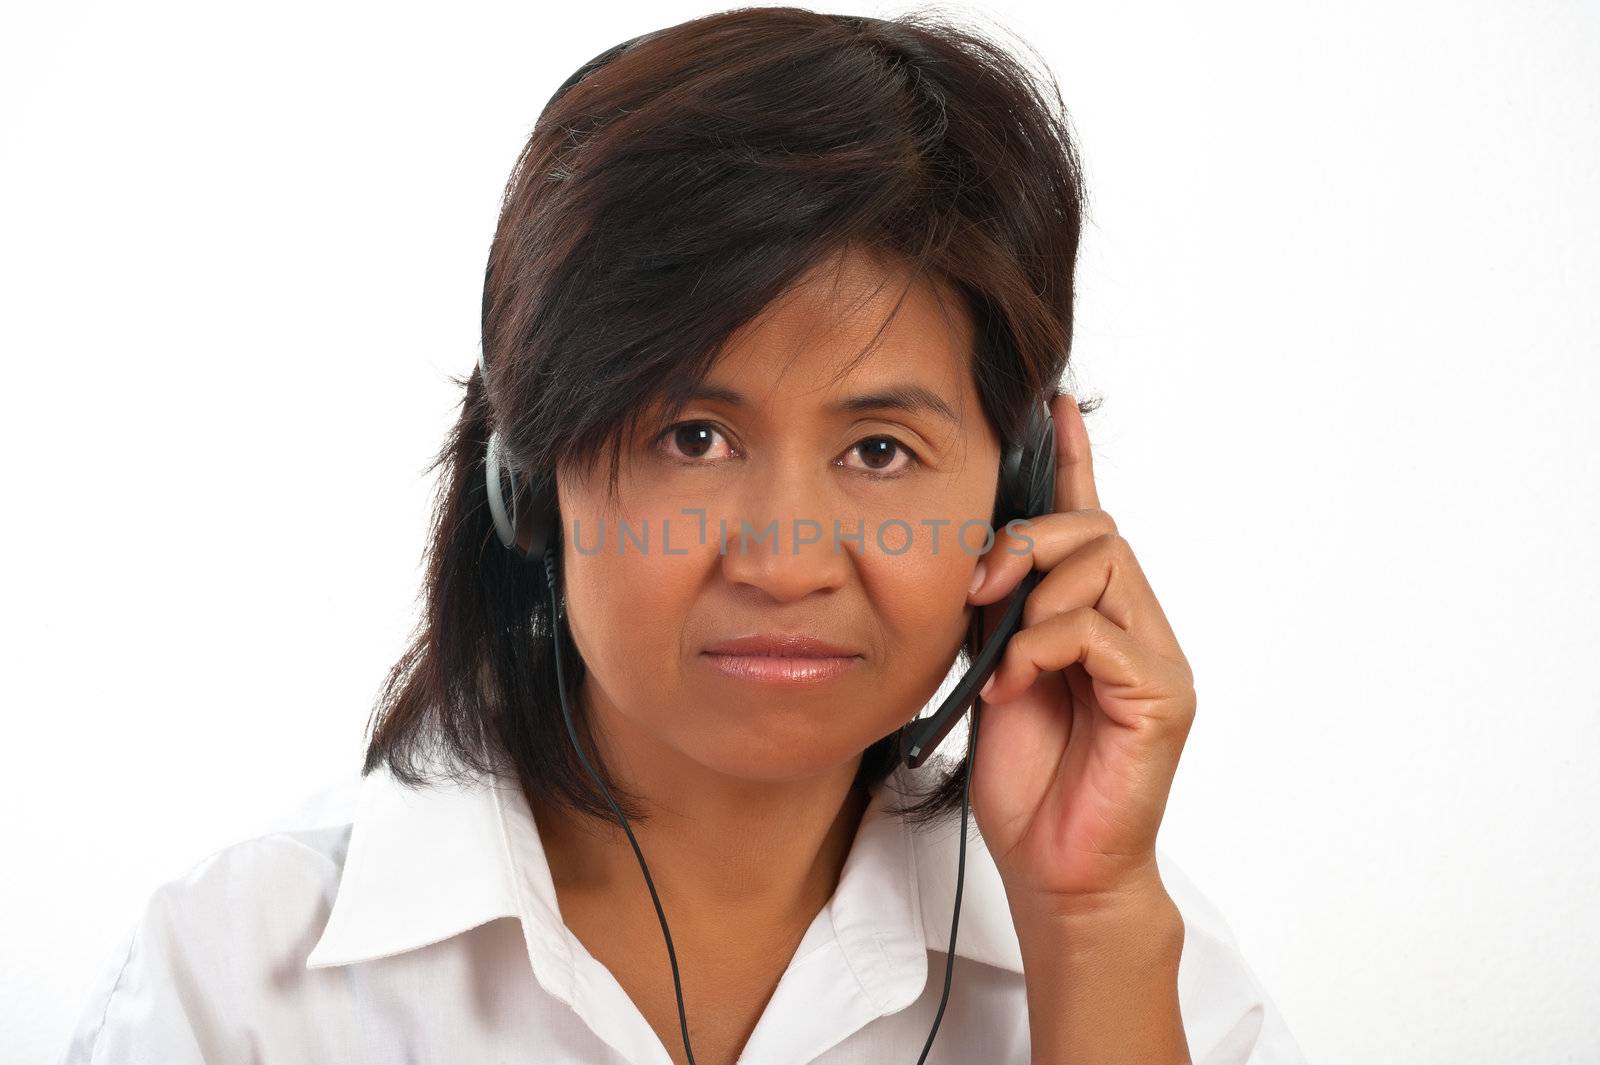 Portrait of a woman with a headset by p.studio66